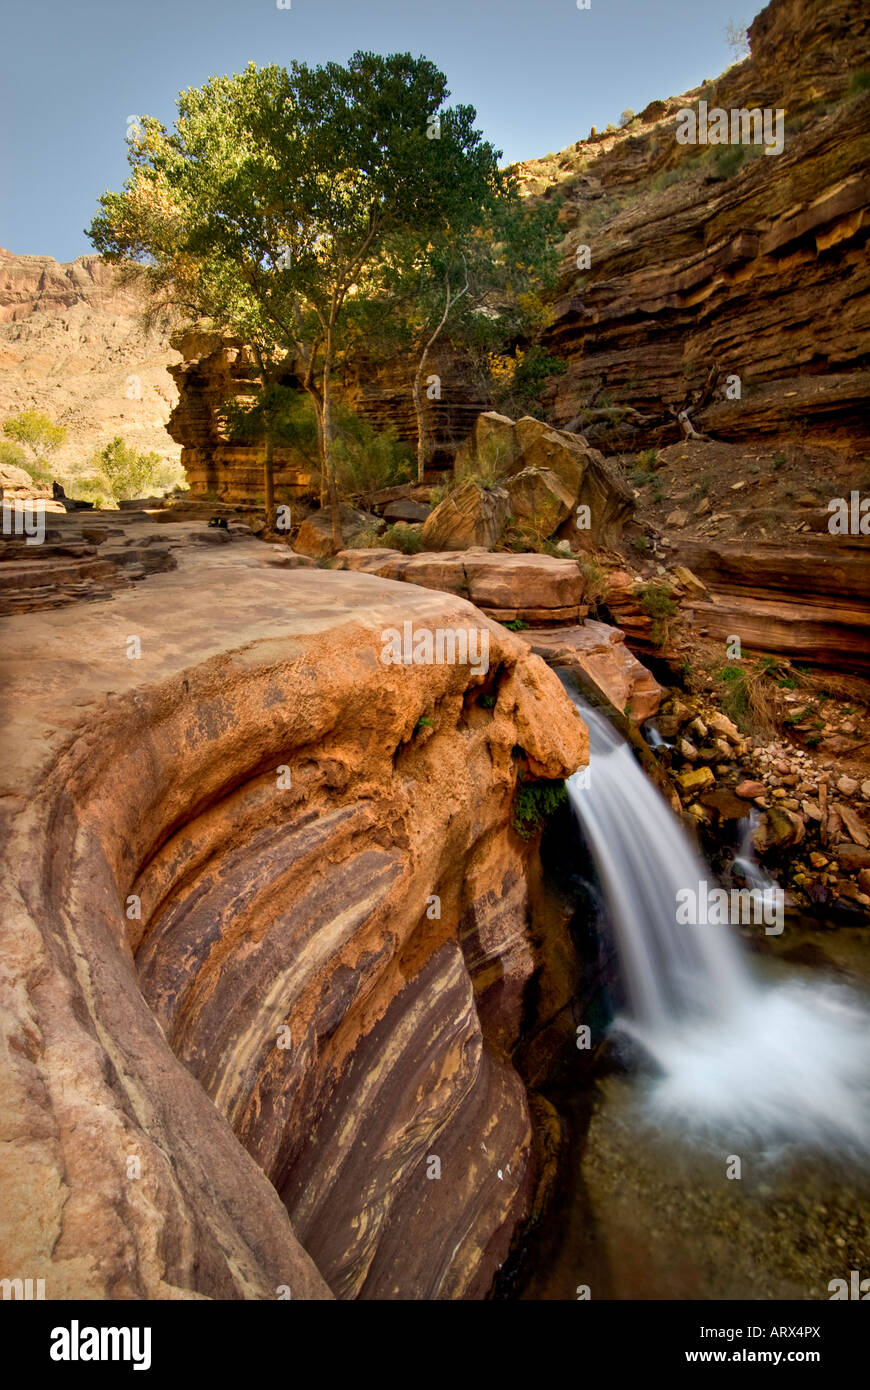 The Patio up Deer Creek a side canyon hike in the Grand Canyon National Park Arizona Stock Photo